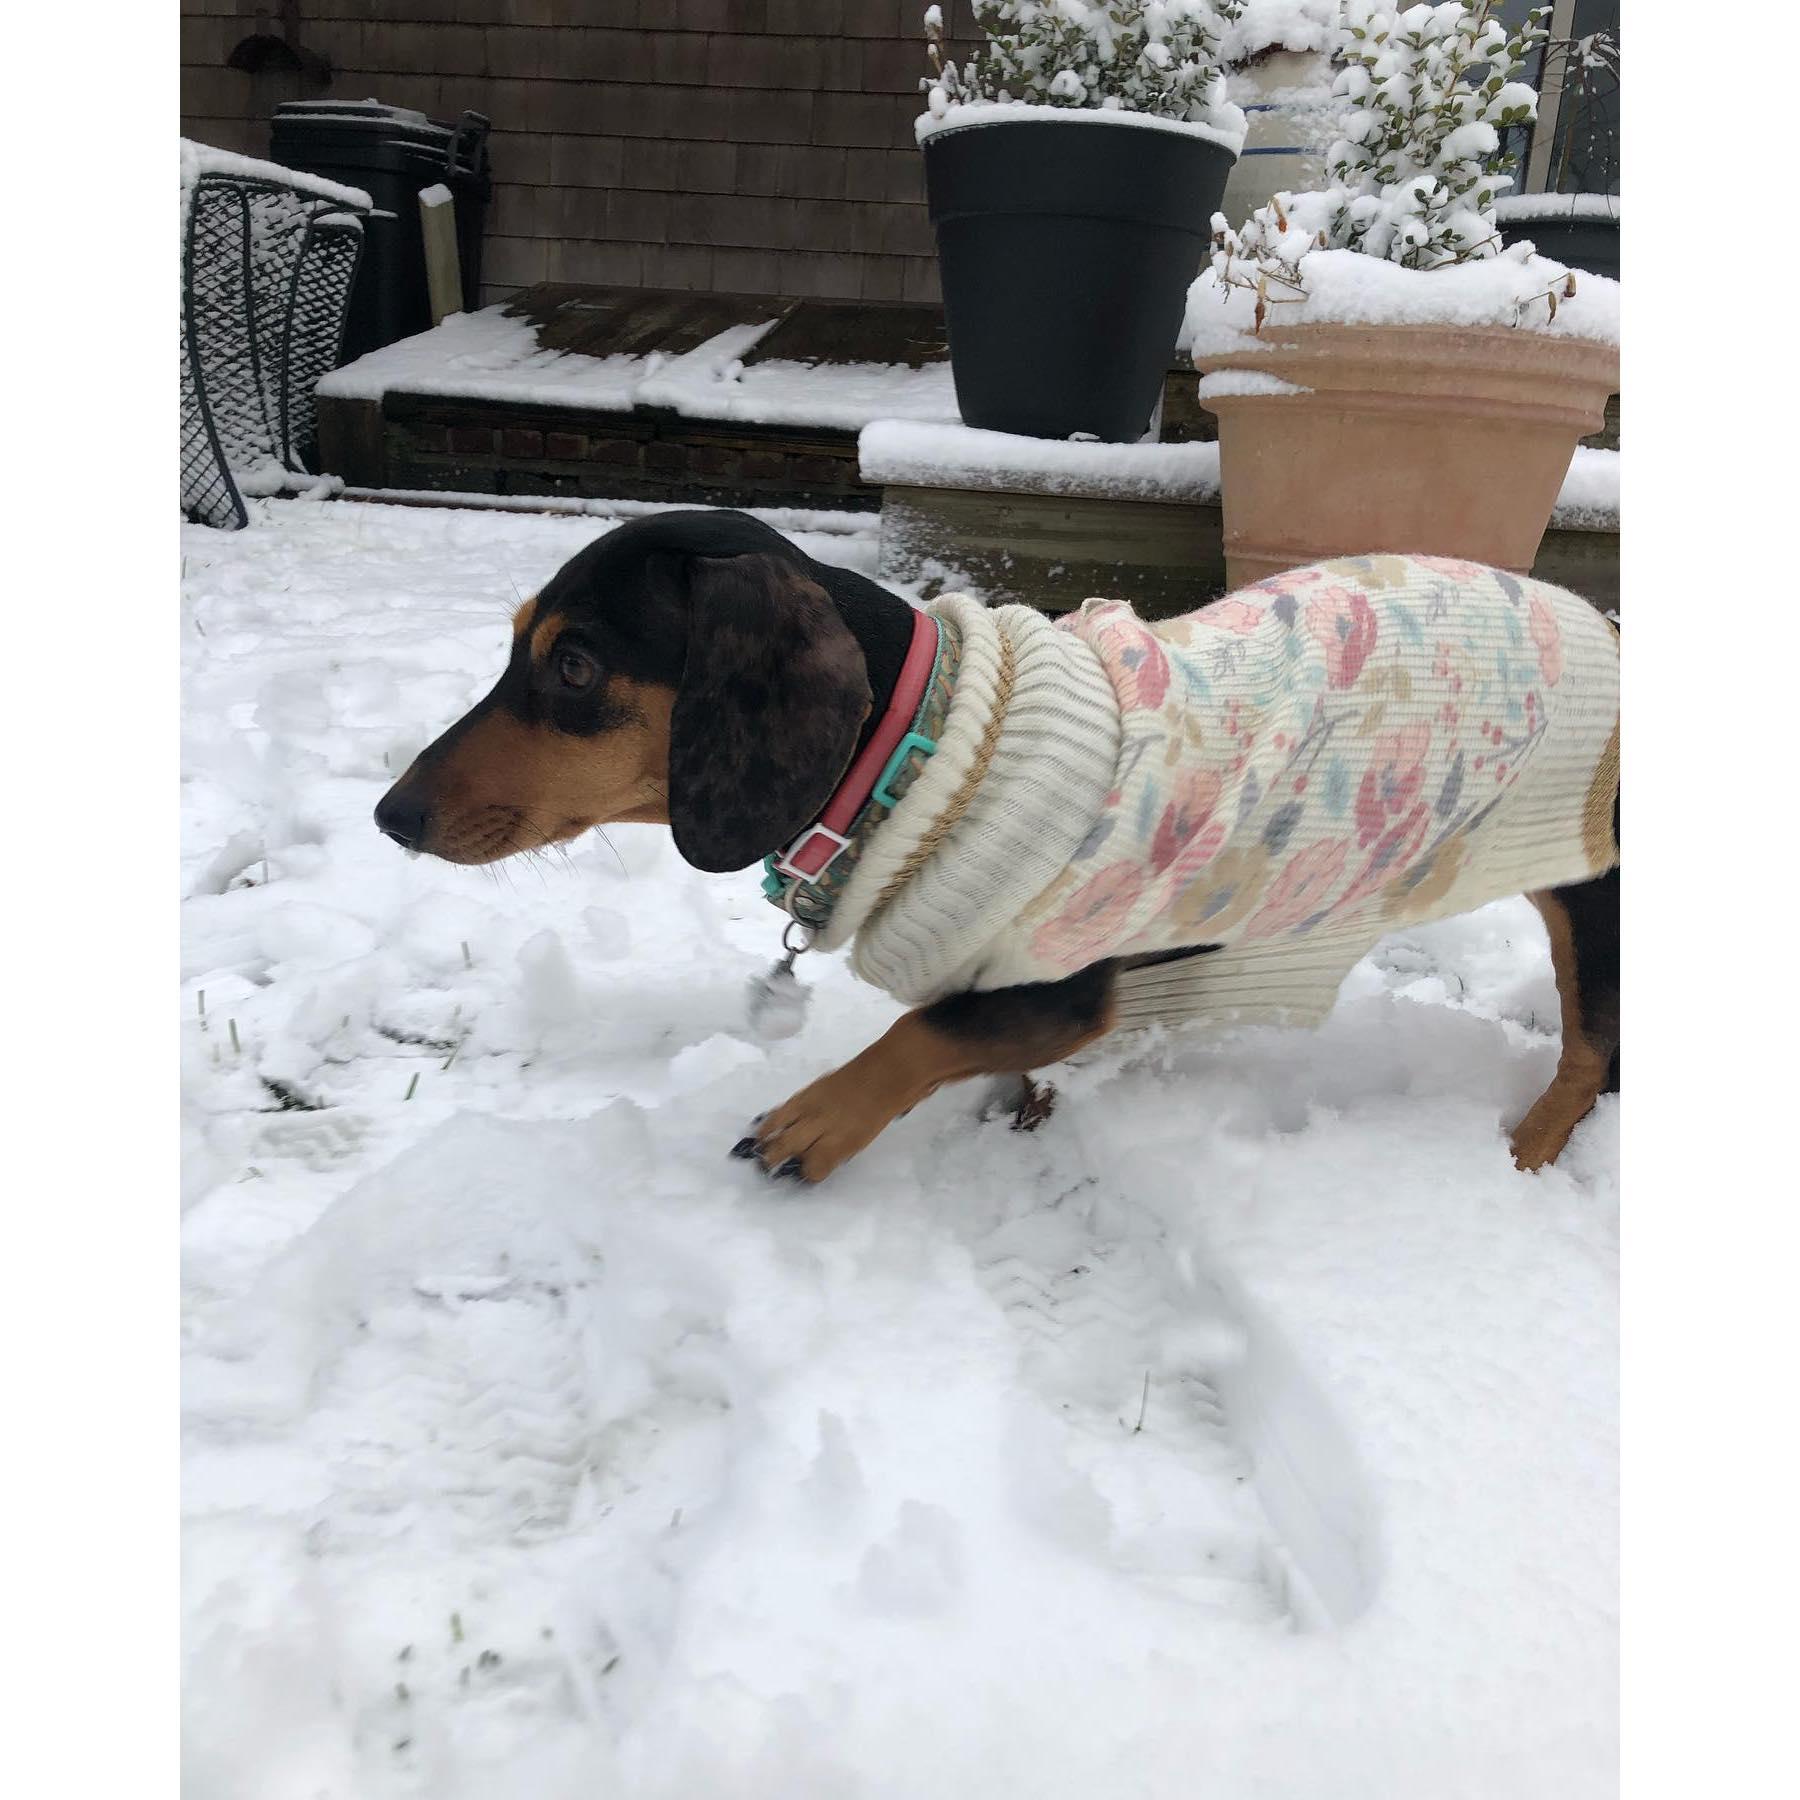 Whimsy's first snow- December 2019